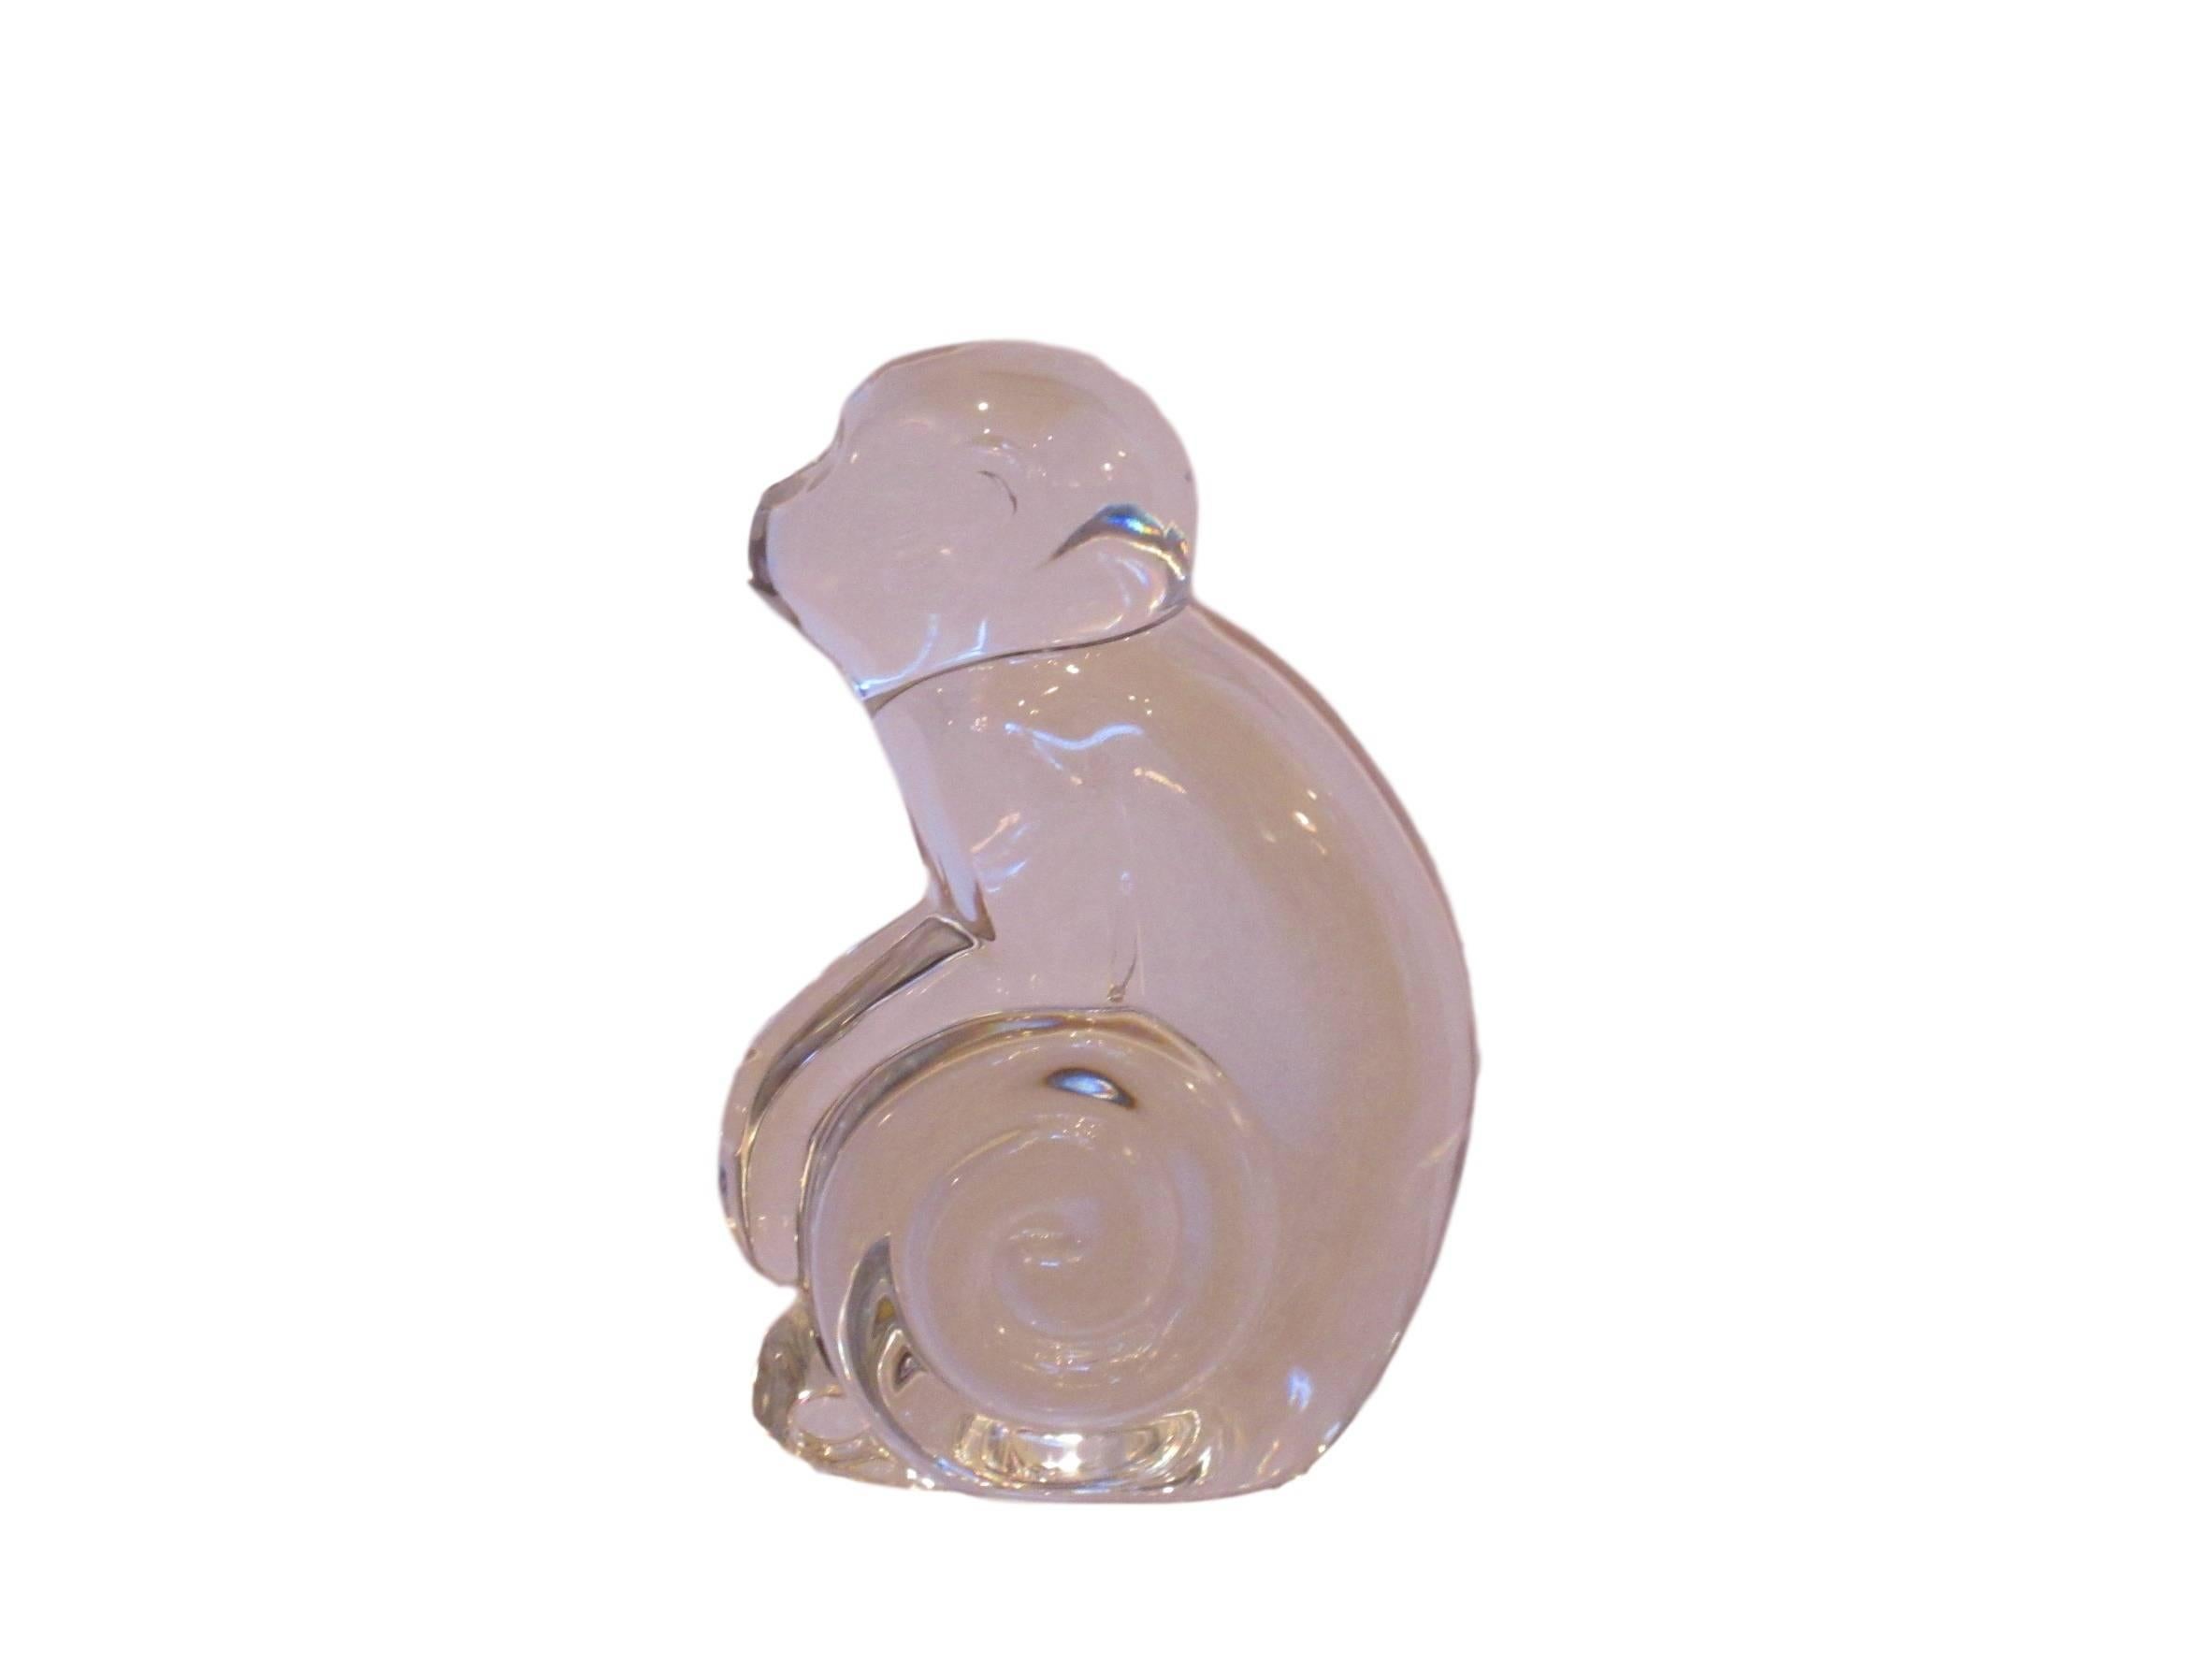 A crystal monkey sitting with his tail curled like a spiral under his arms. Signed De Sousa on the bottom. A great stylized piece for decoration or a paperweight. marked “Val St.”.